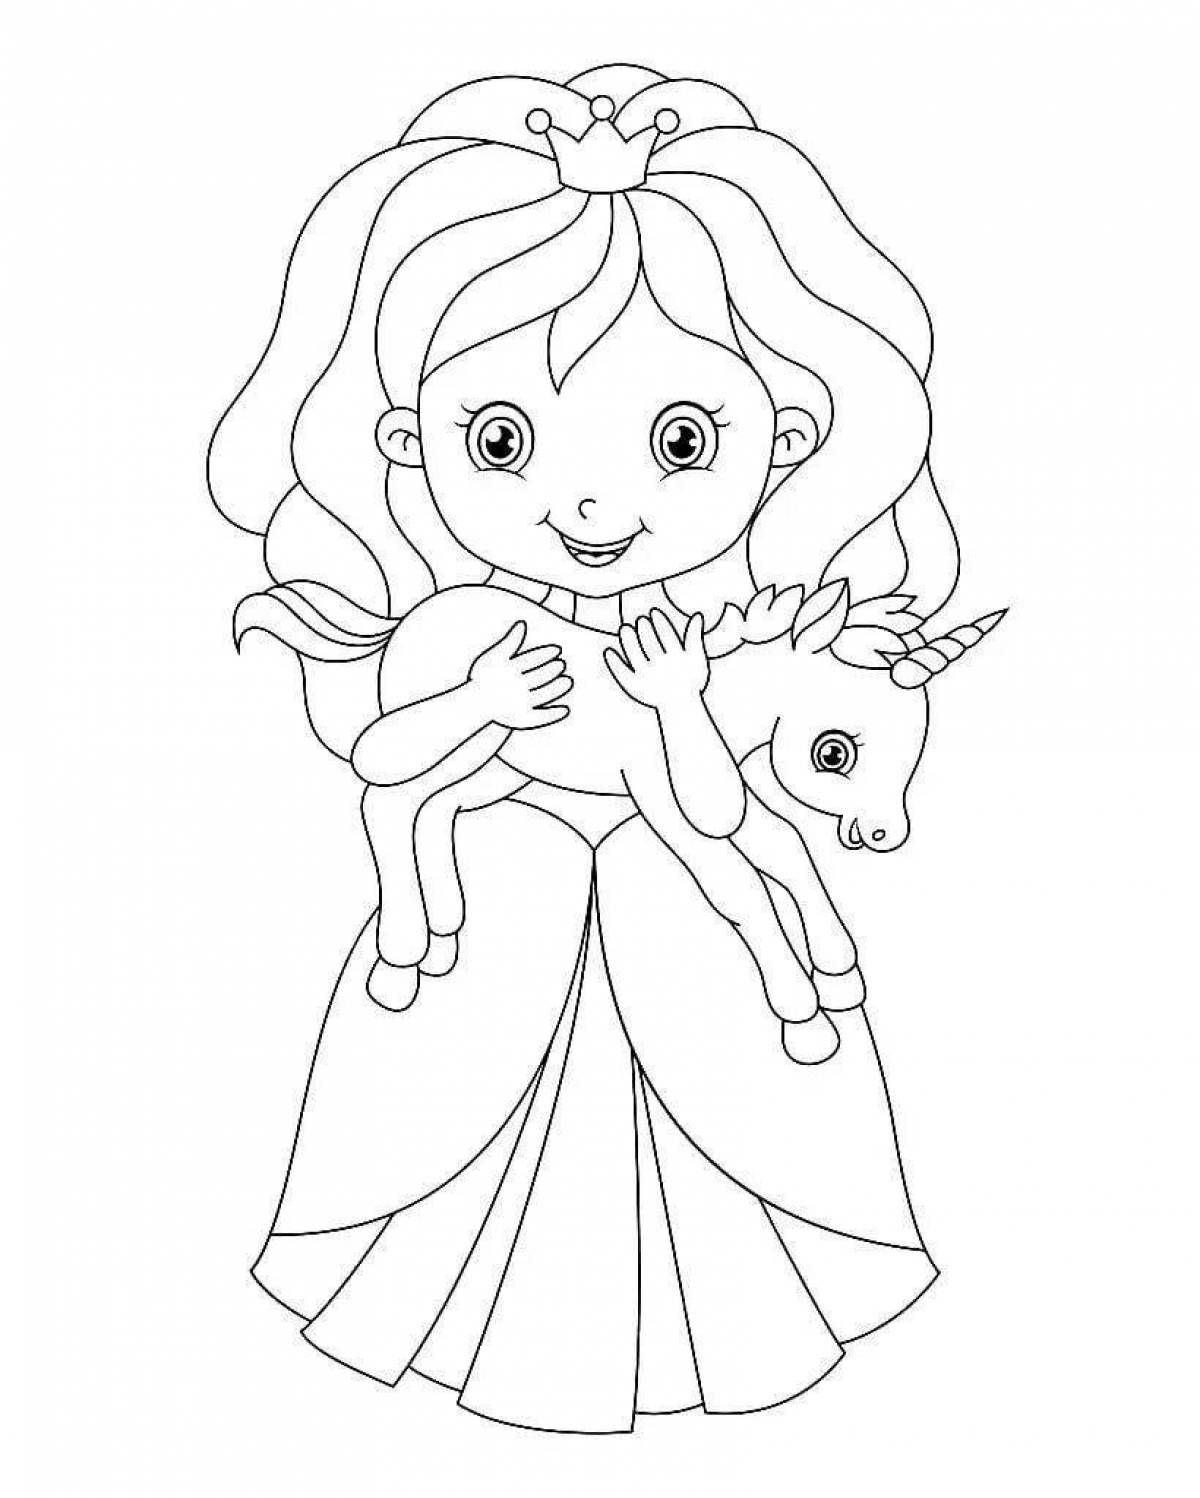 Shining coloring book for 3-4 year old princess girls